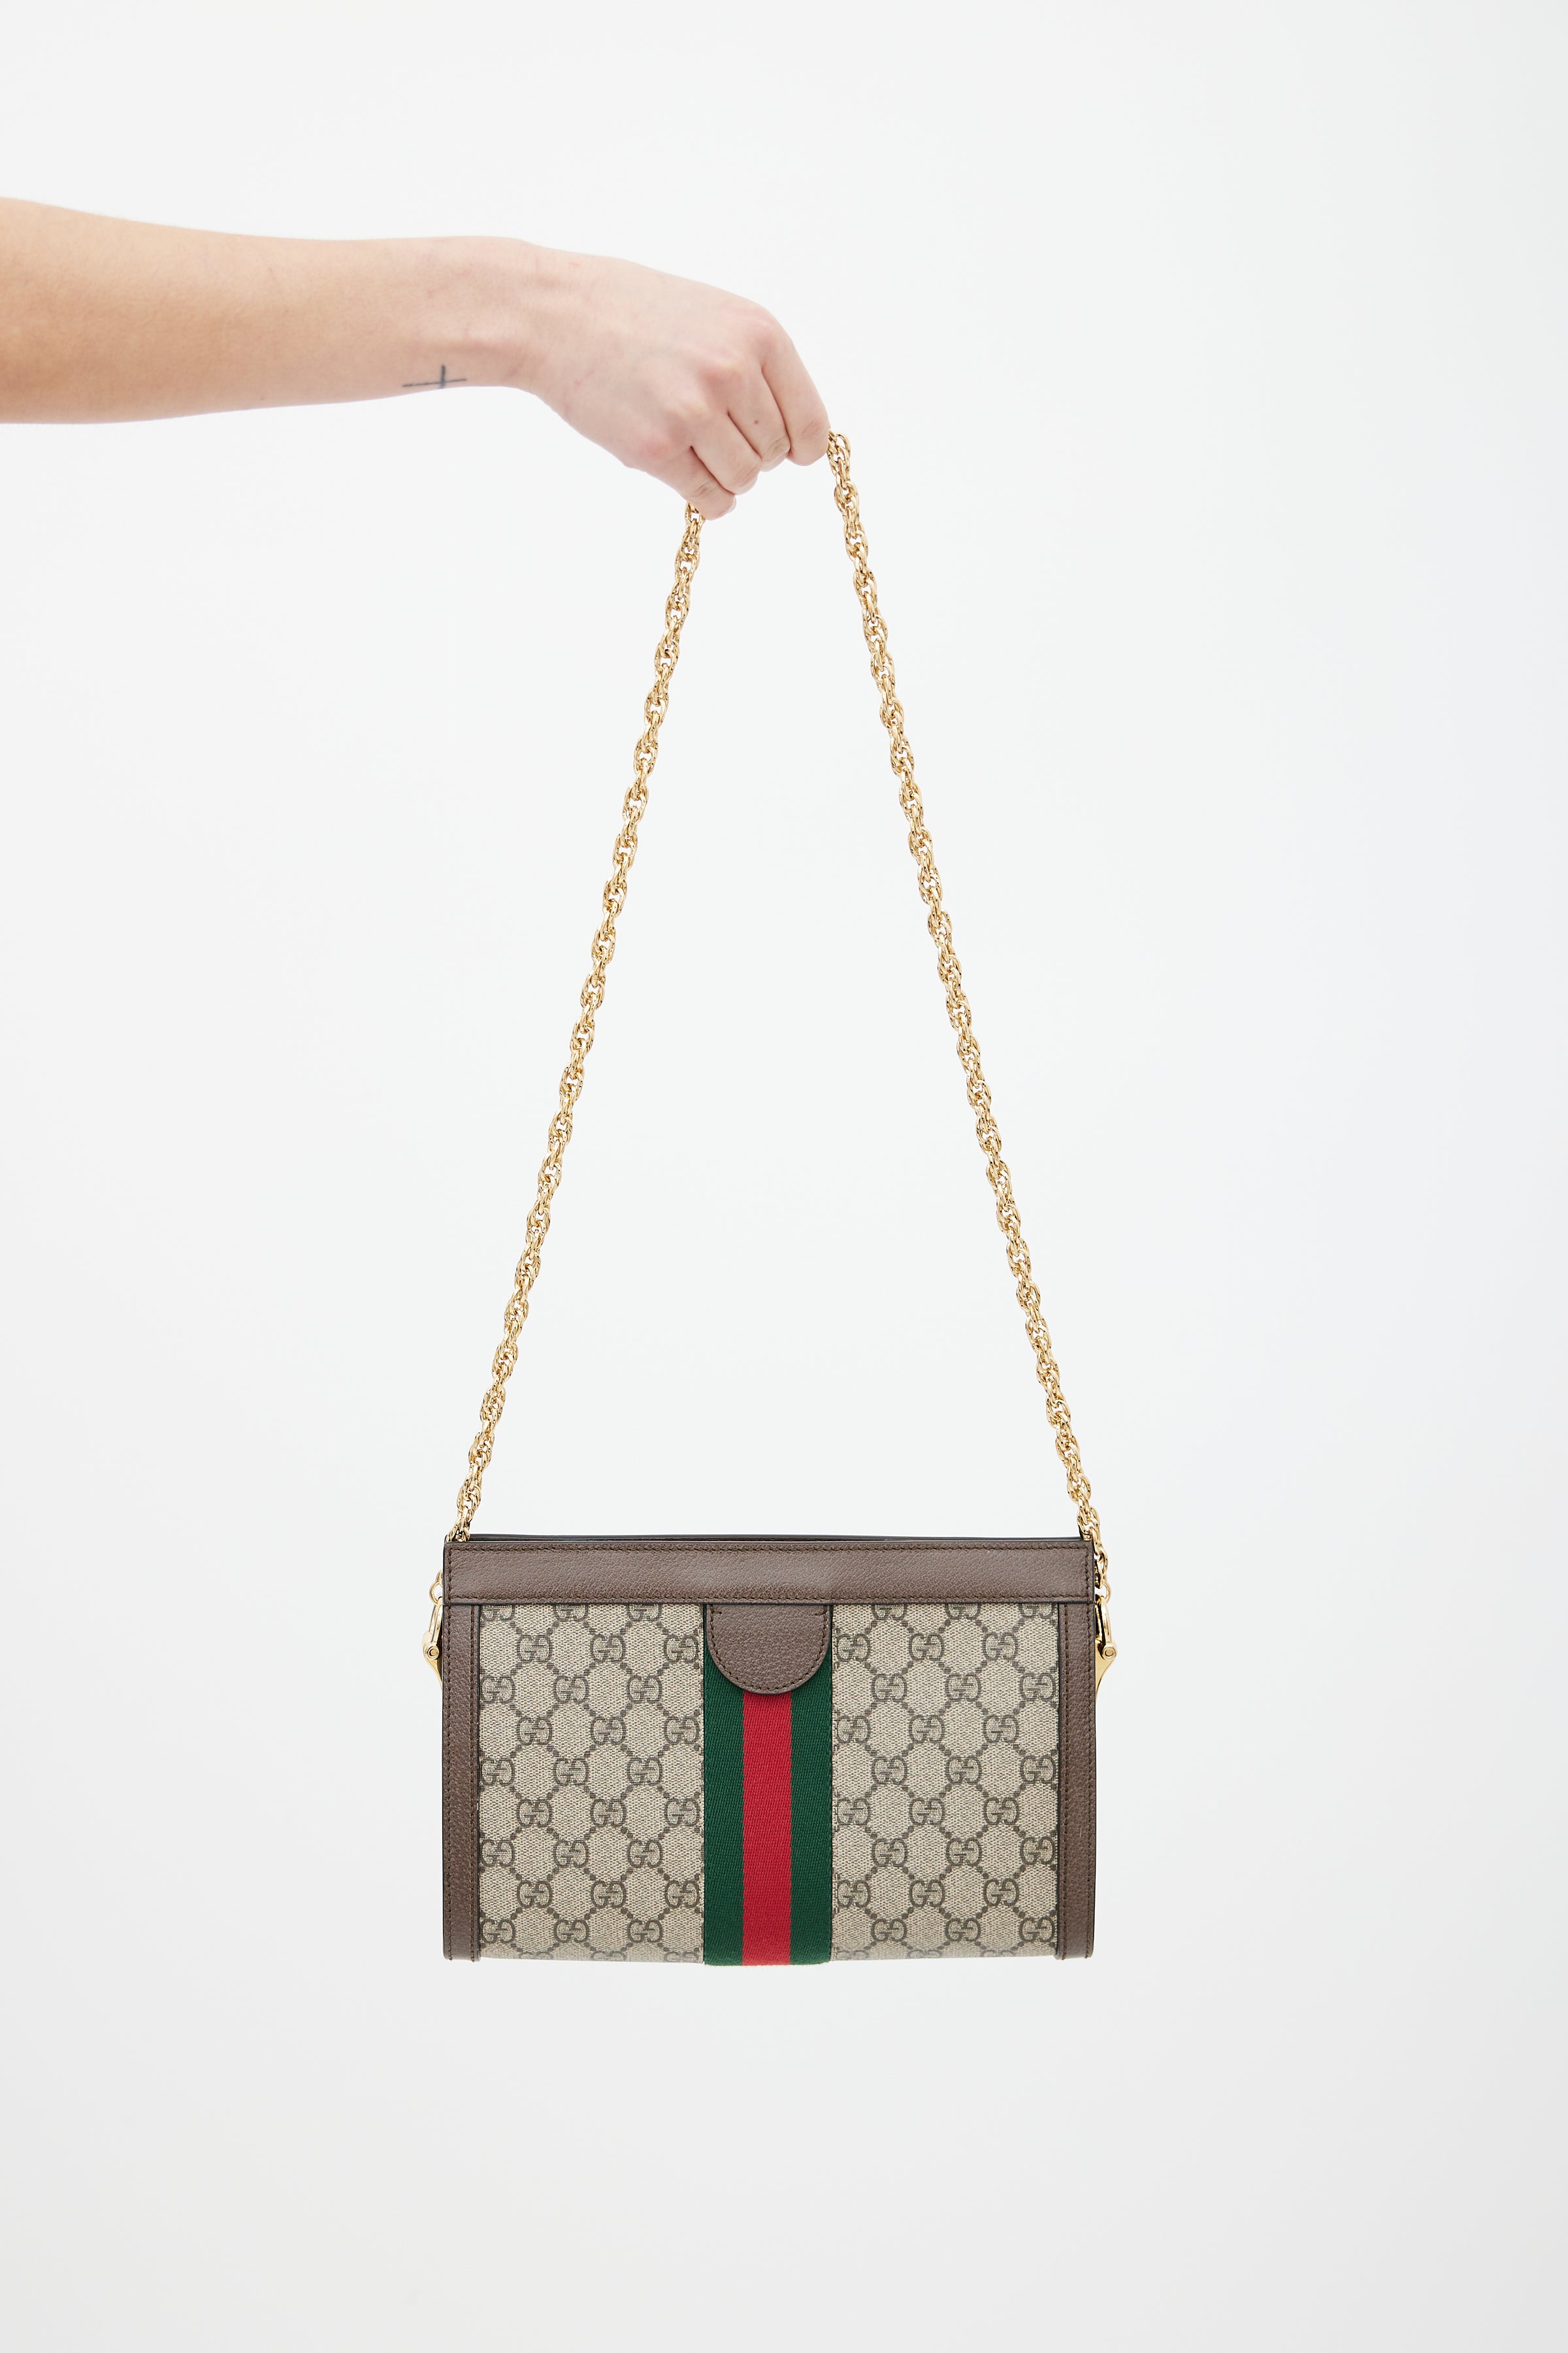 Gucci Ophidia Small Handbag in Brown